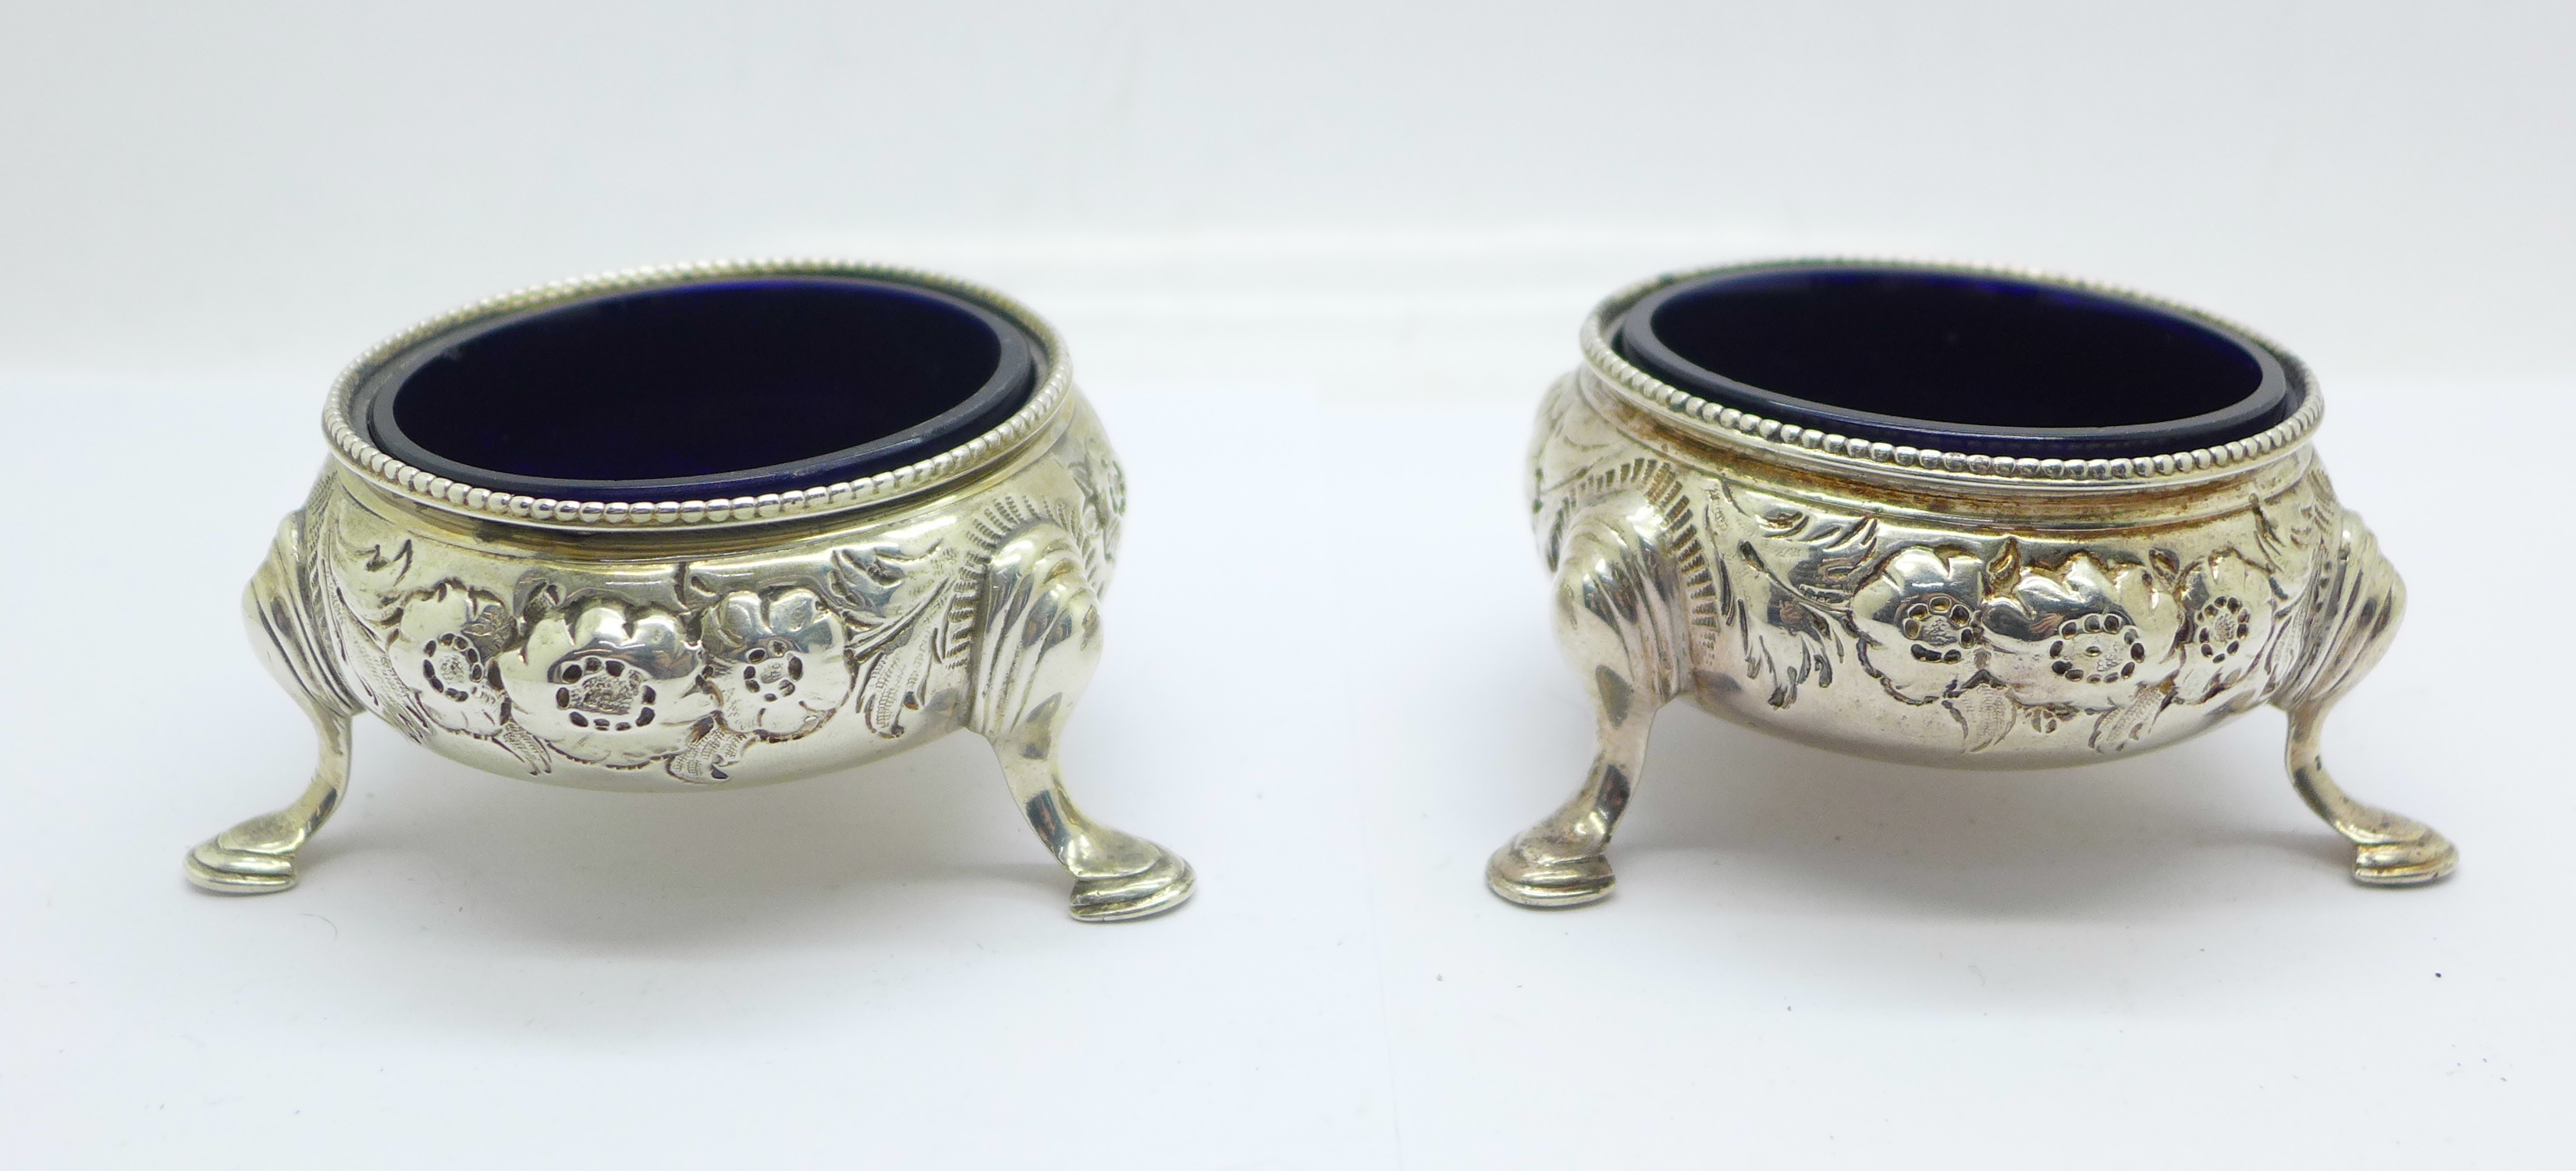 A pair of Victorian silver salts with blue glass liners, Robert Harper, London 1861, weight